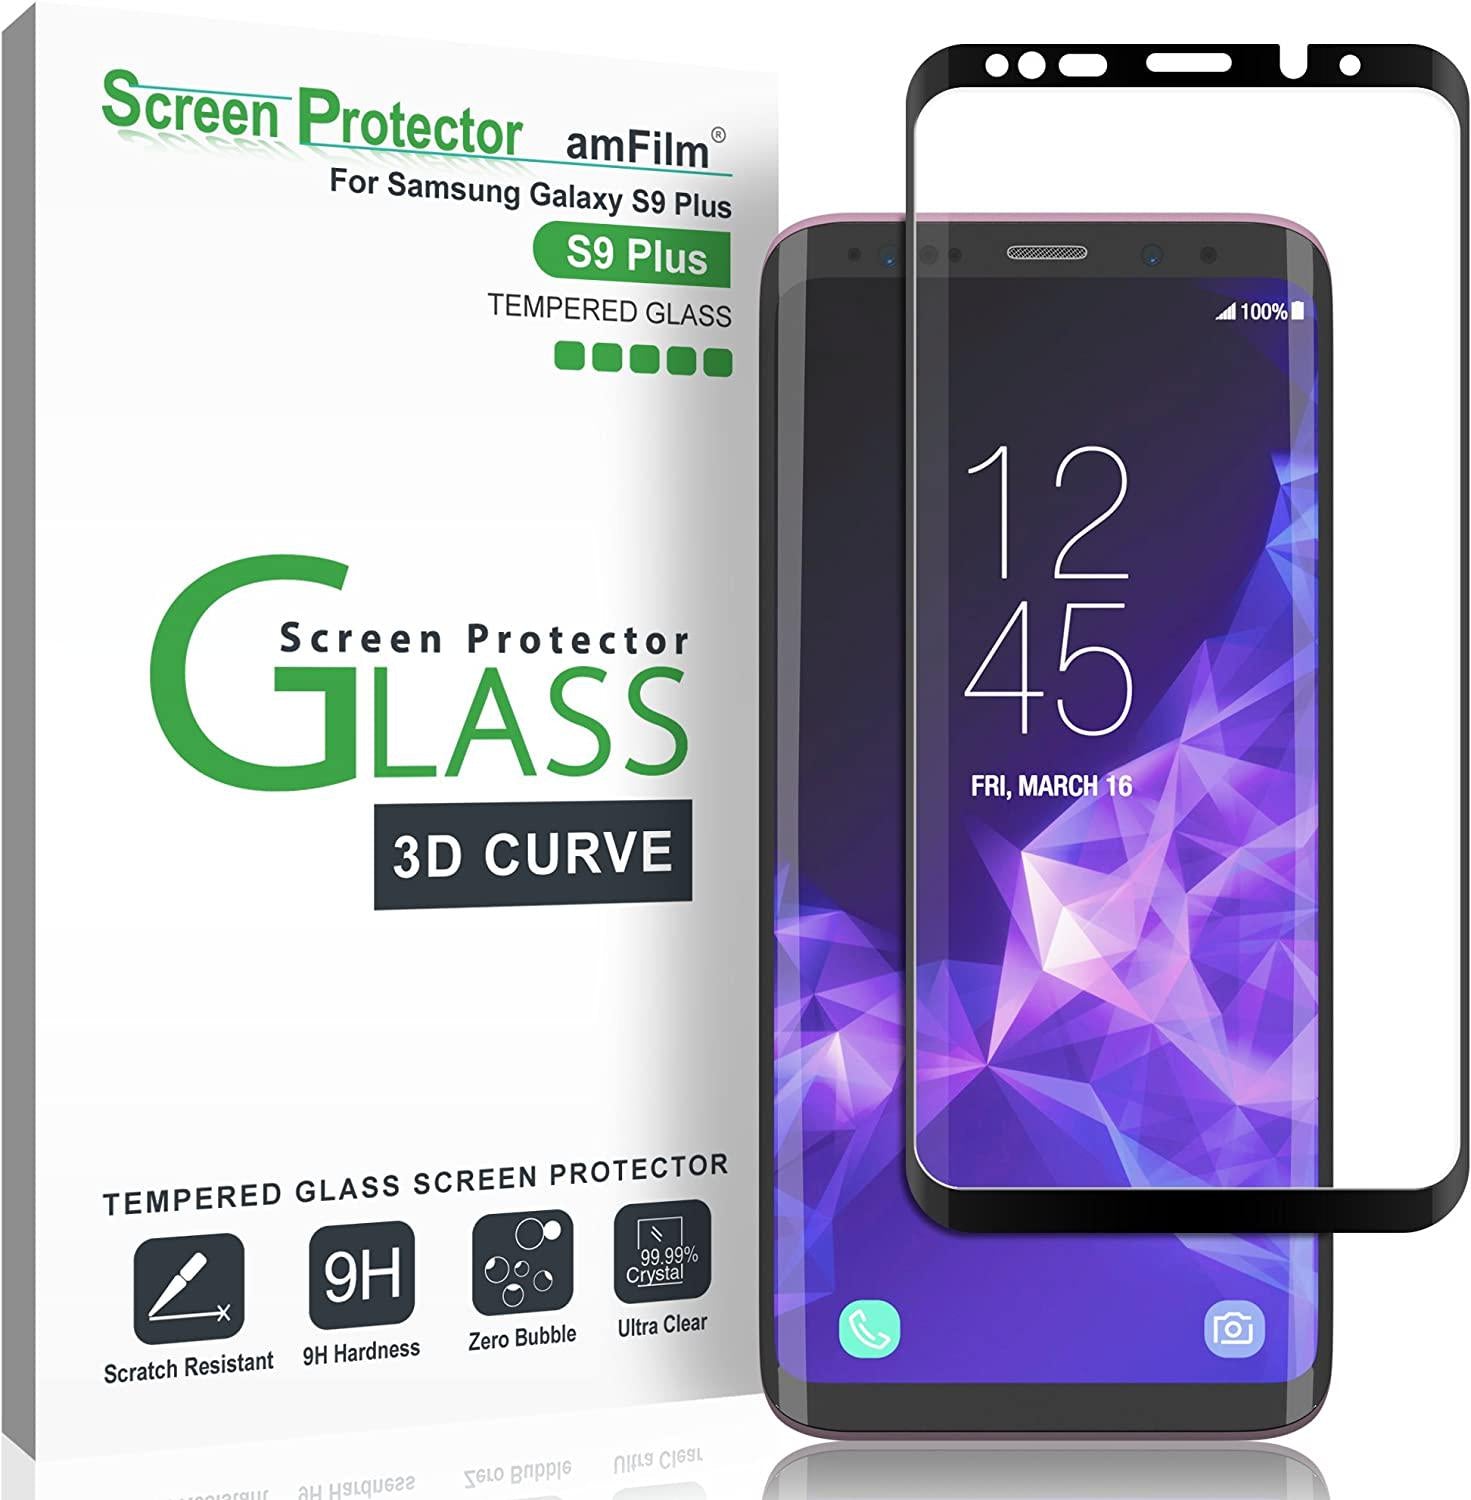 amFilm, Galaxy S9 Plus Screen Protector Glass, amFilm Full Cover (3D Curved) Tempered Glass Screen Protector with Dot Matrix for Samsung Galaxy S9+ (Black)